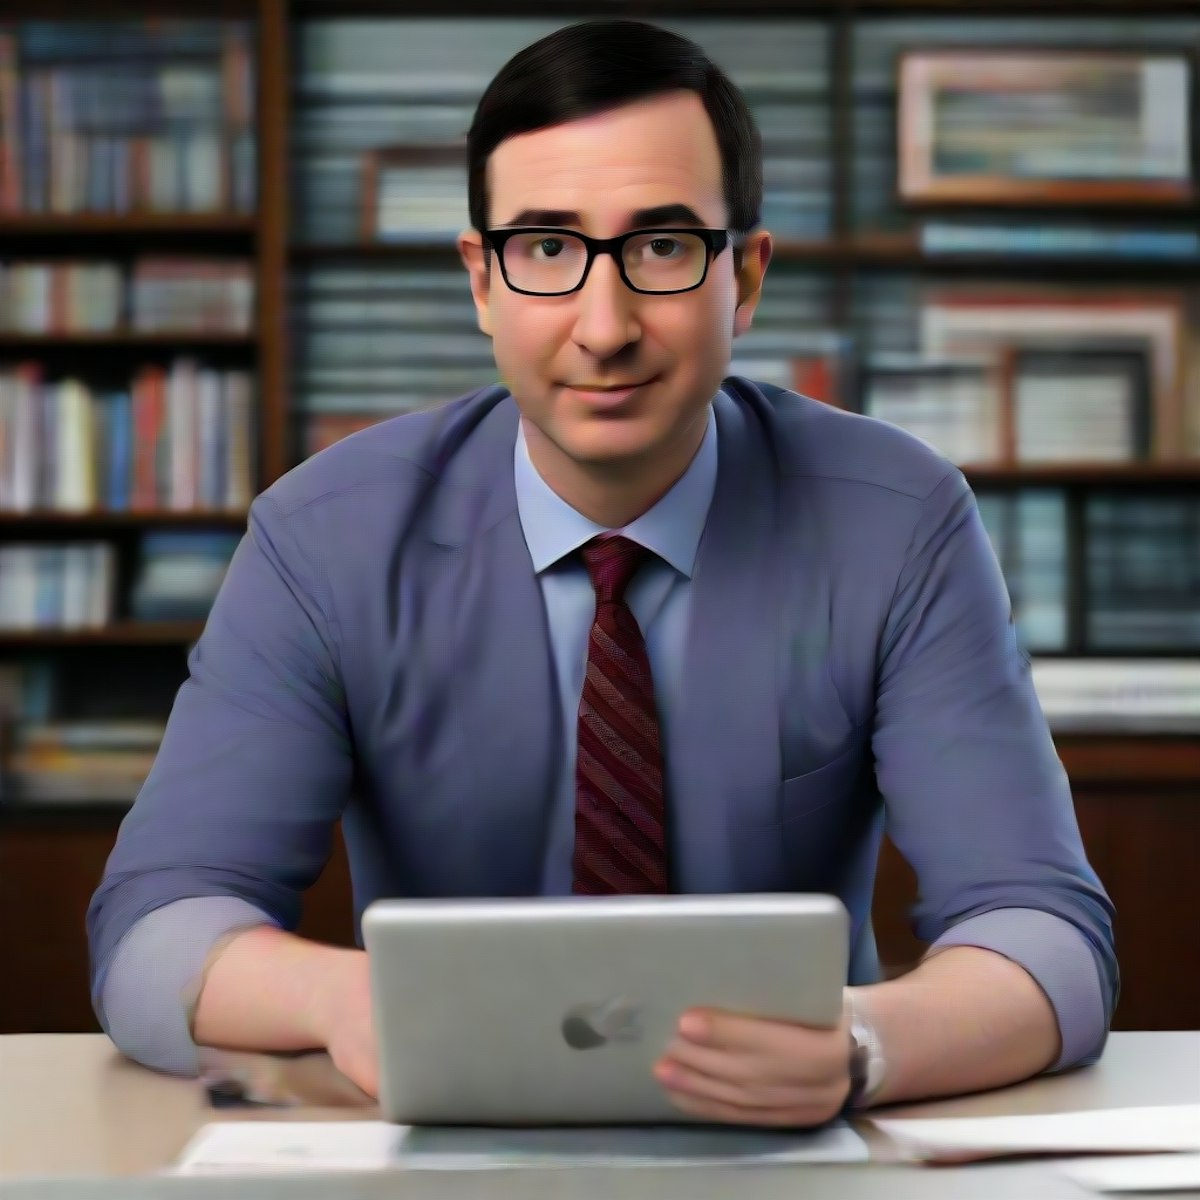 featured image - Tech Monopolies and Internet Gatekeepers Transcript from John Oliver's Last Week Tonight